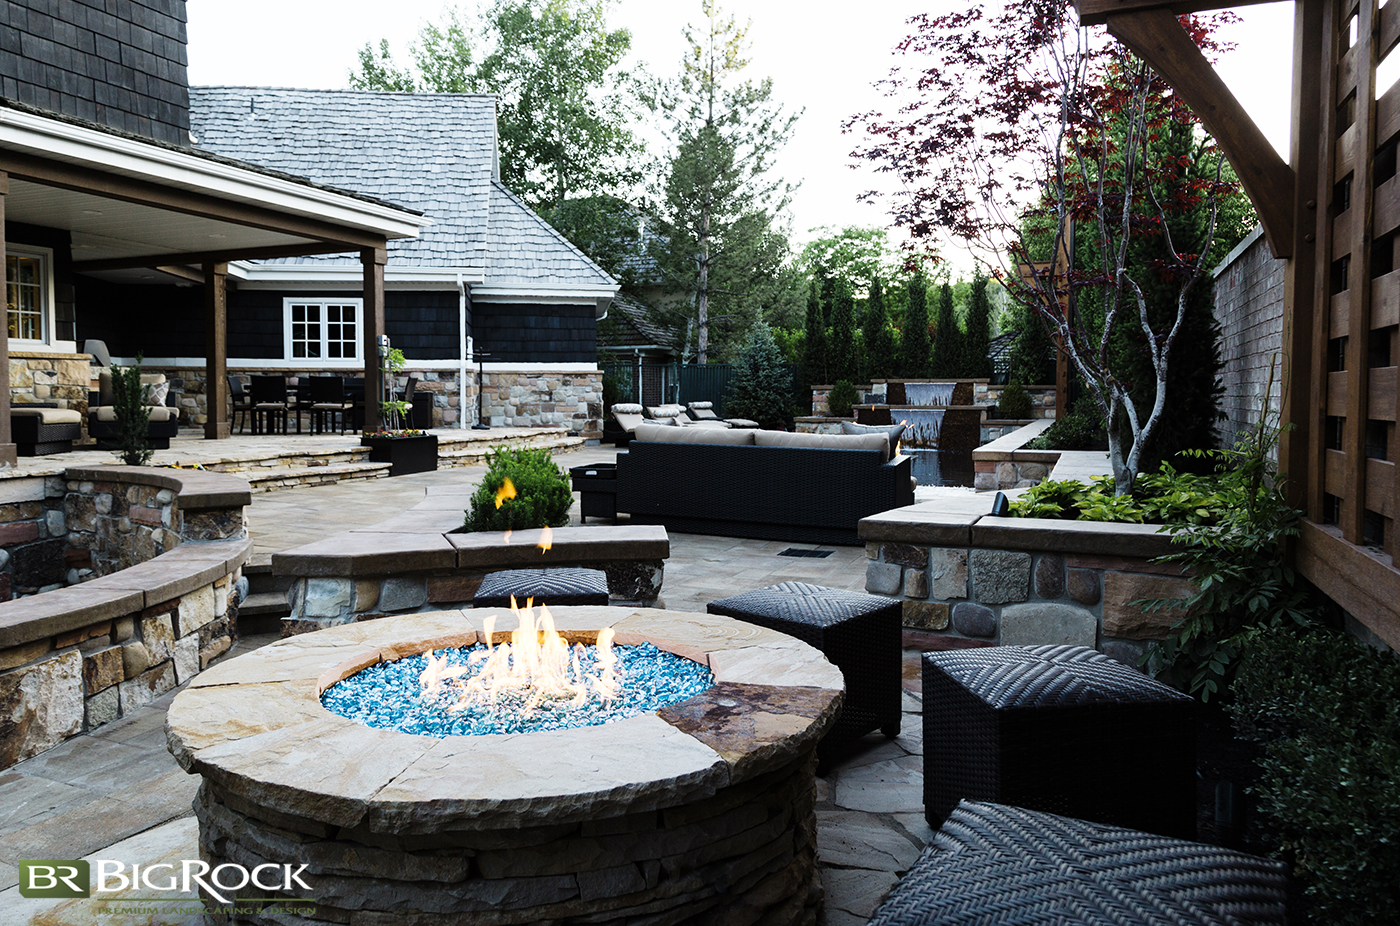 Landscape design is more than choosing what materials you want. Let Big Rock Landscaping help you create a landscape plan that flows well with your outdoor activities and design.